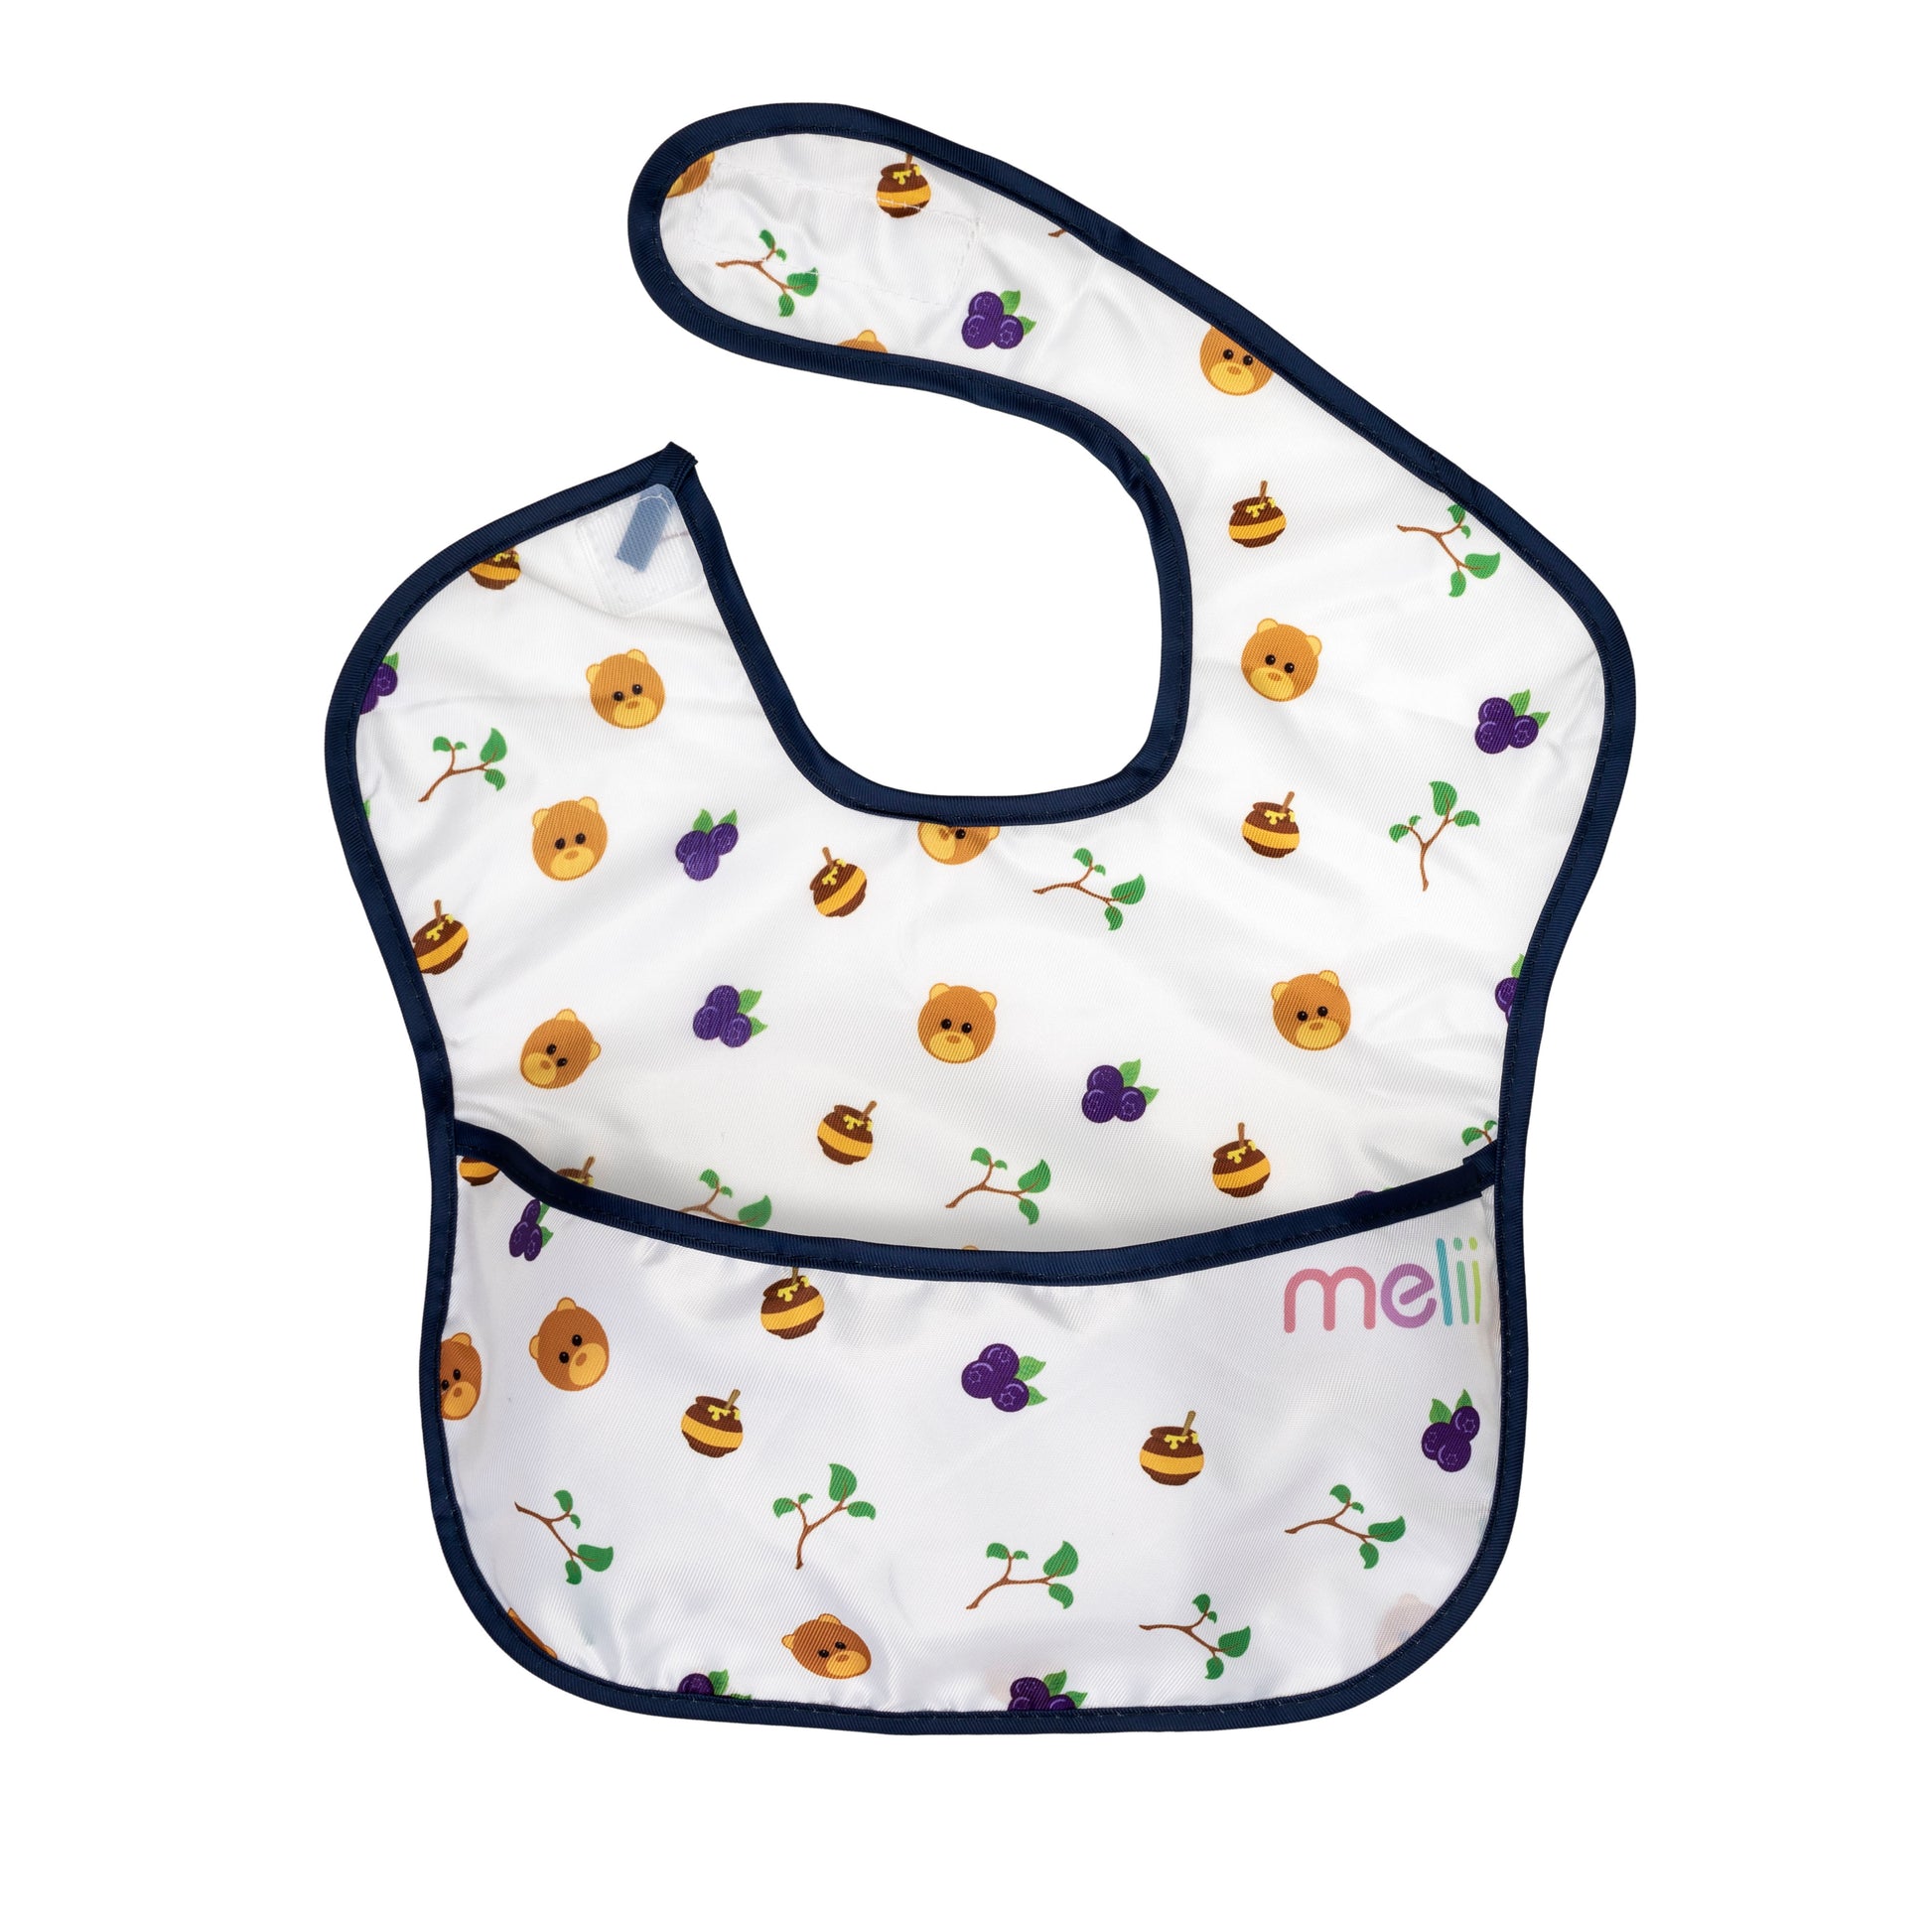 melii Fold Up Bib 2-Pack - Water-Resistant and Playful Bear Design, Adjustable Velcro, Deep Spill Pocket - Perfect for On-the-Go Parents and Messy Mealtimes